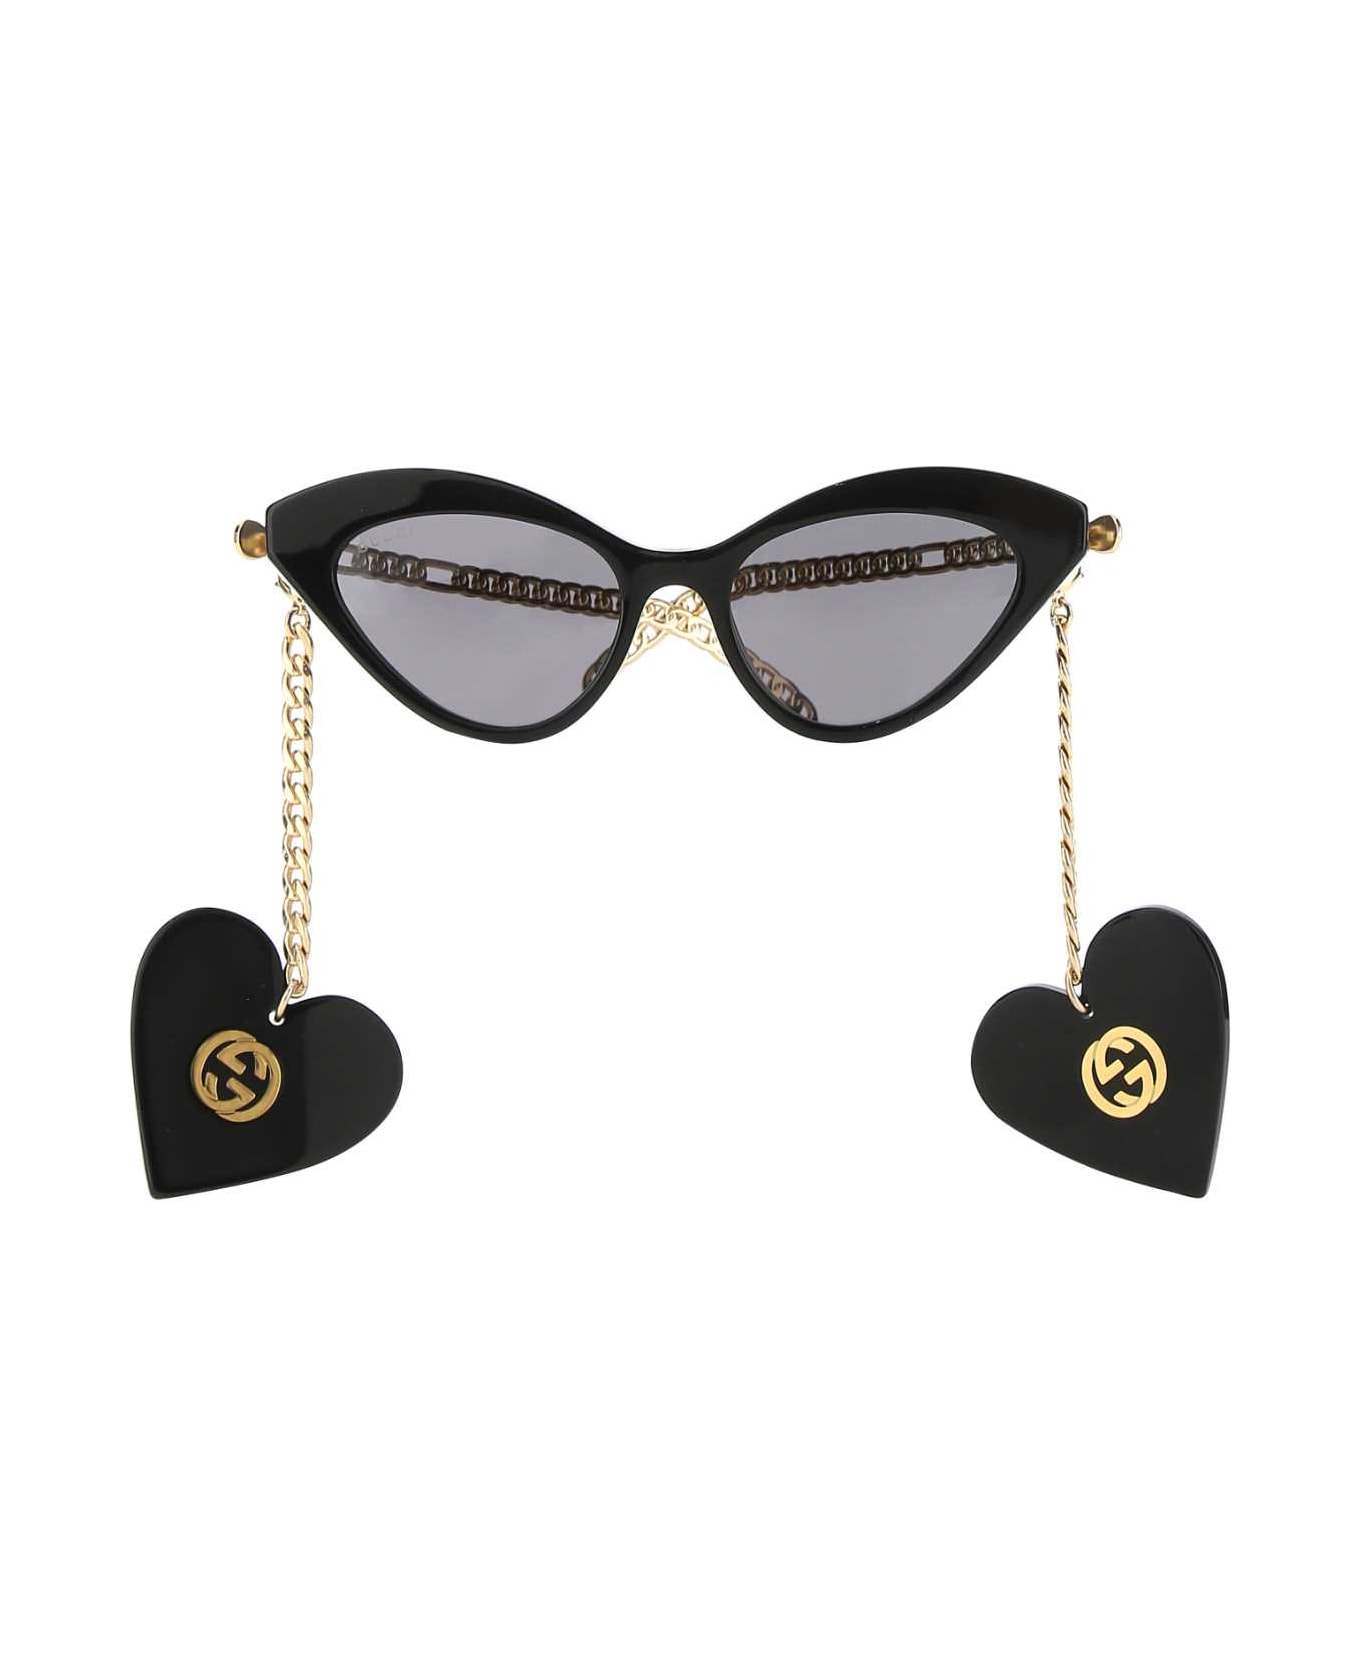 Gucci Two-tone Acetate And Metal Sunglasses - 1012 サングラス